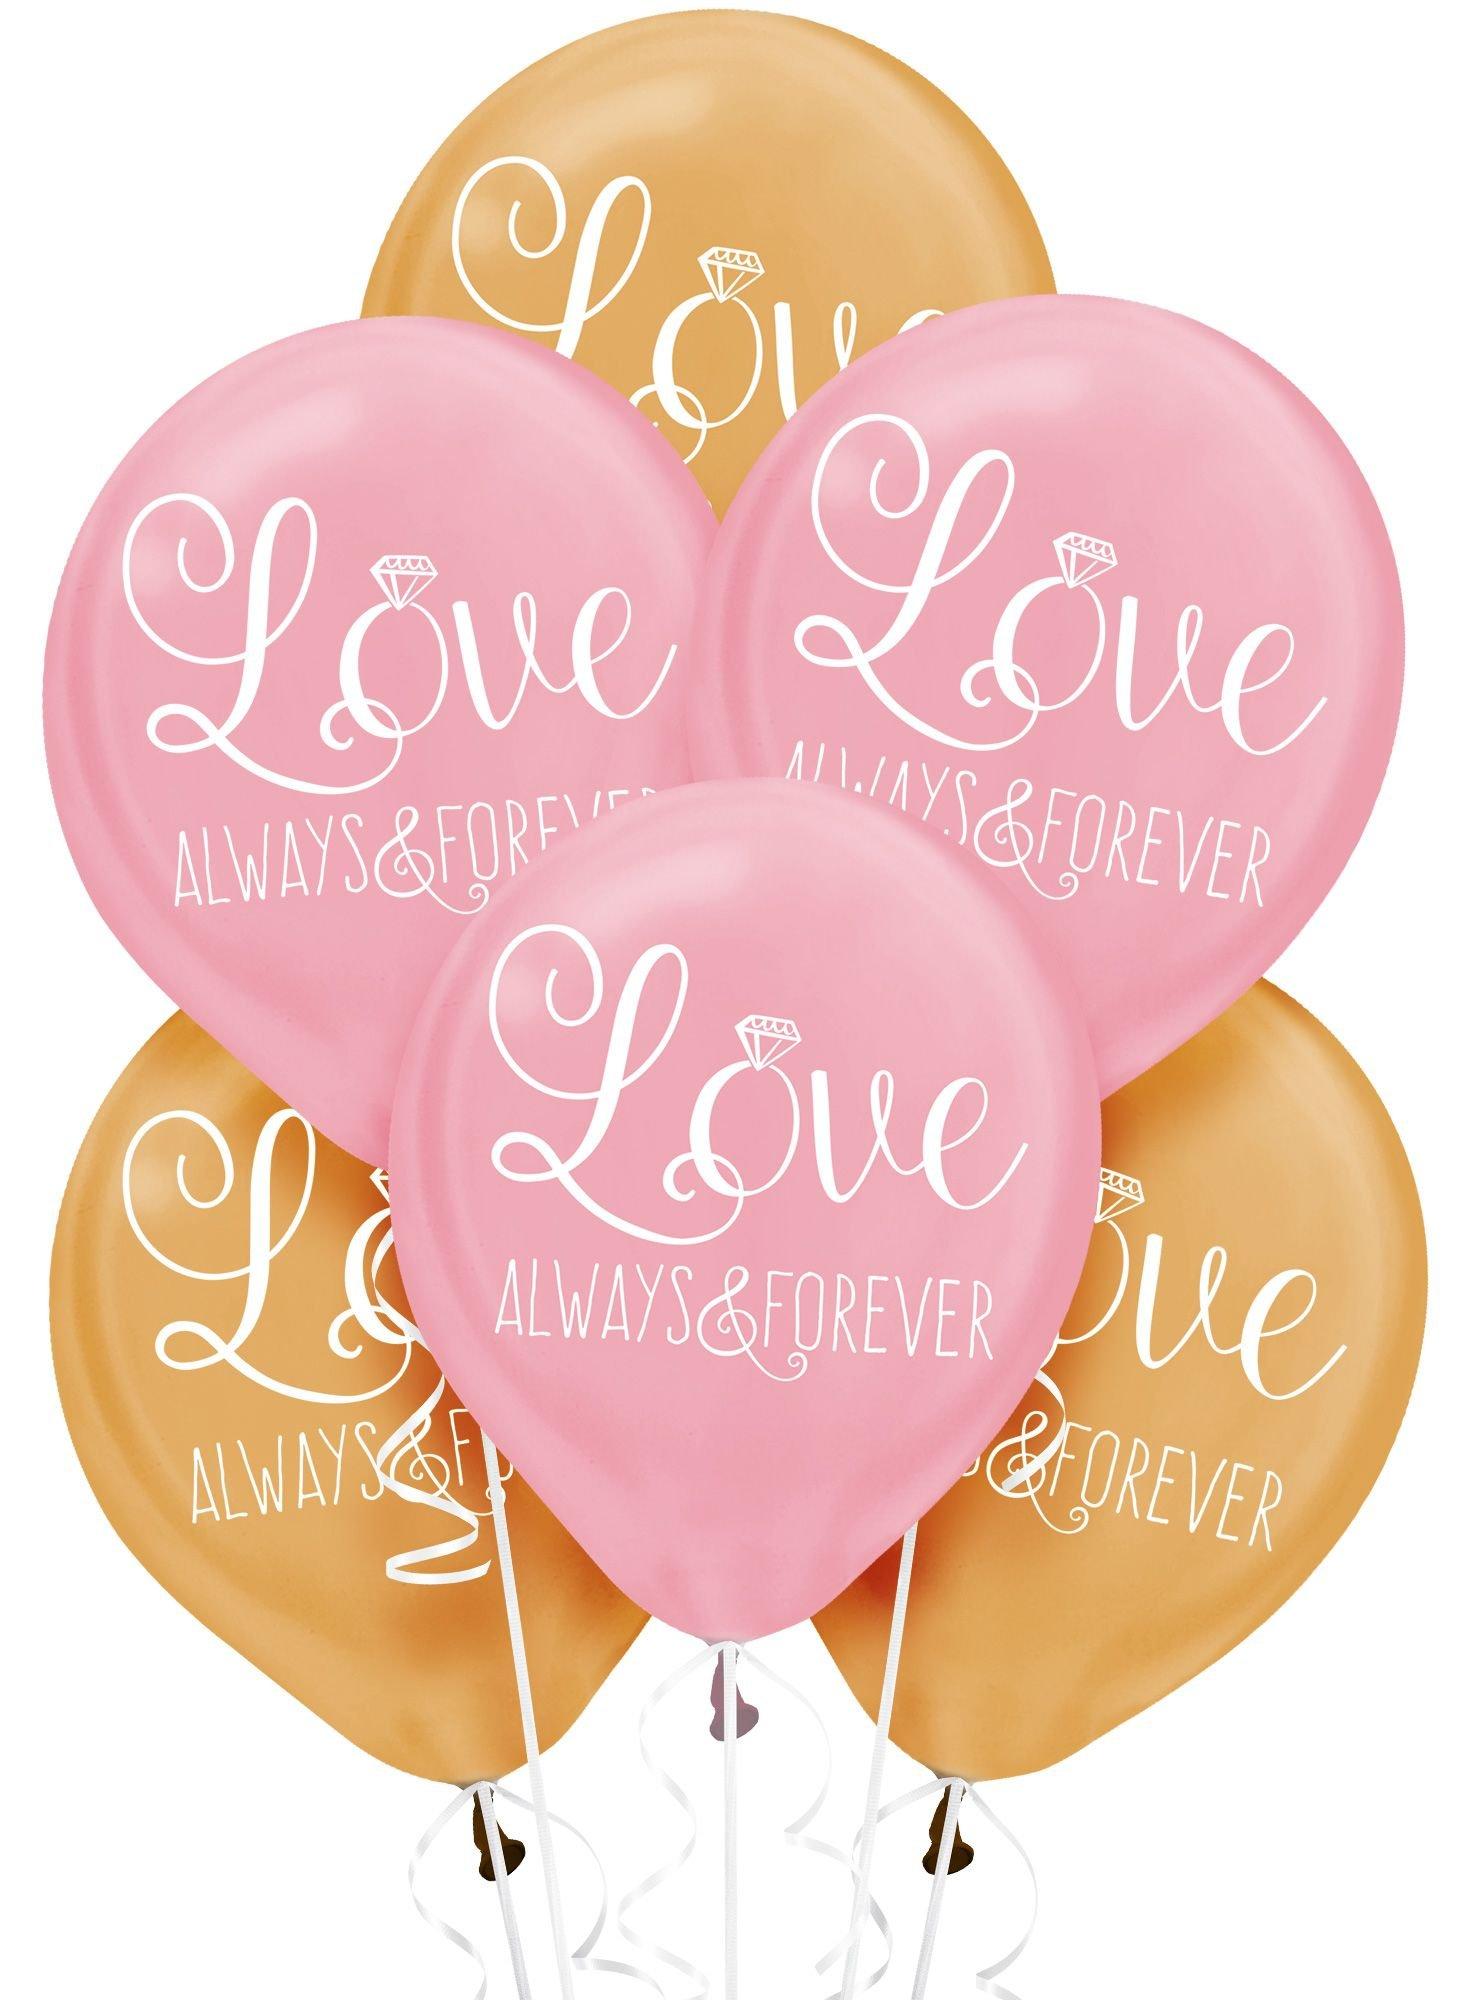 Gold & Pink Sparkling Wedding Balloons 6ct | Party City